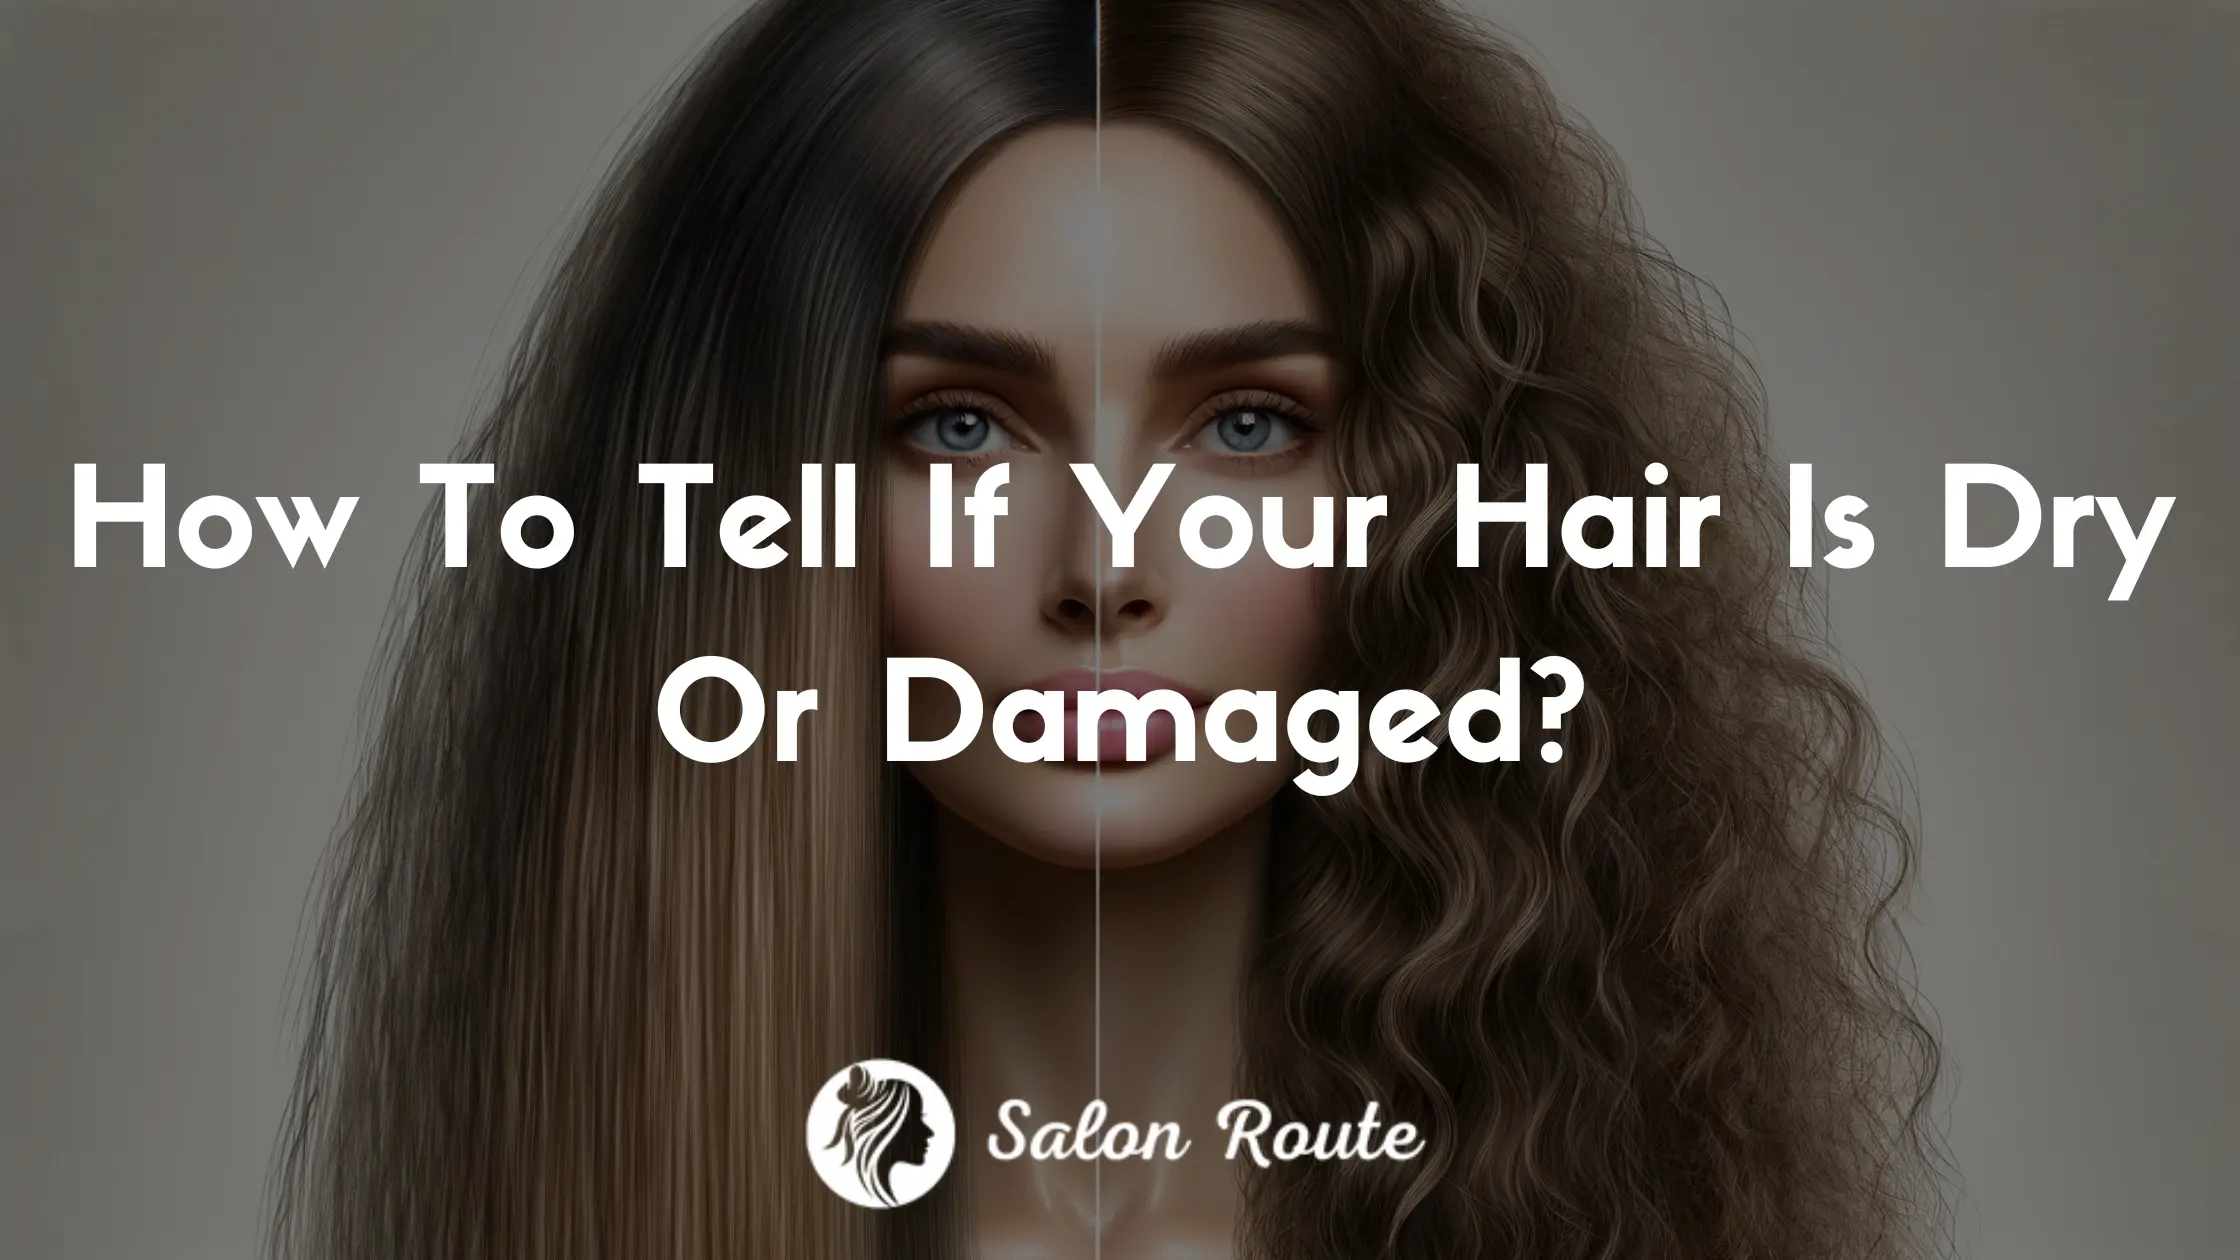 How To Tell If Your Hair Is Dry Or Damaged?